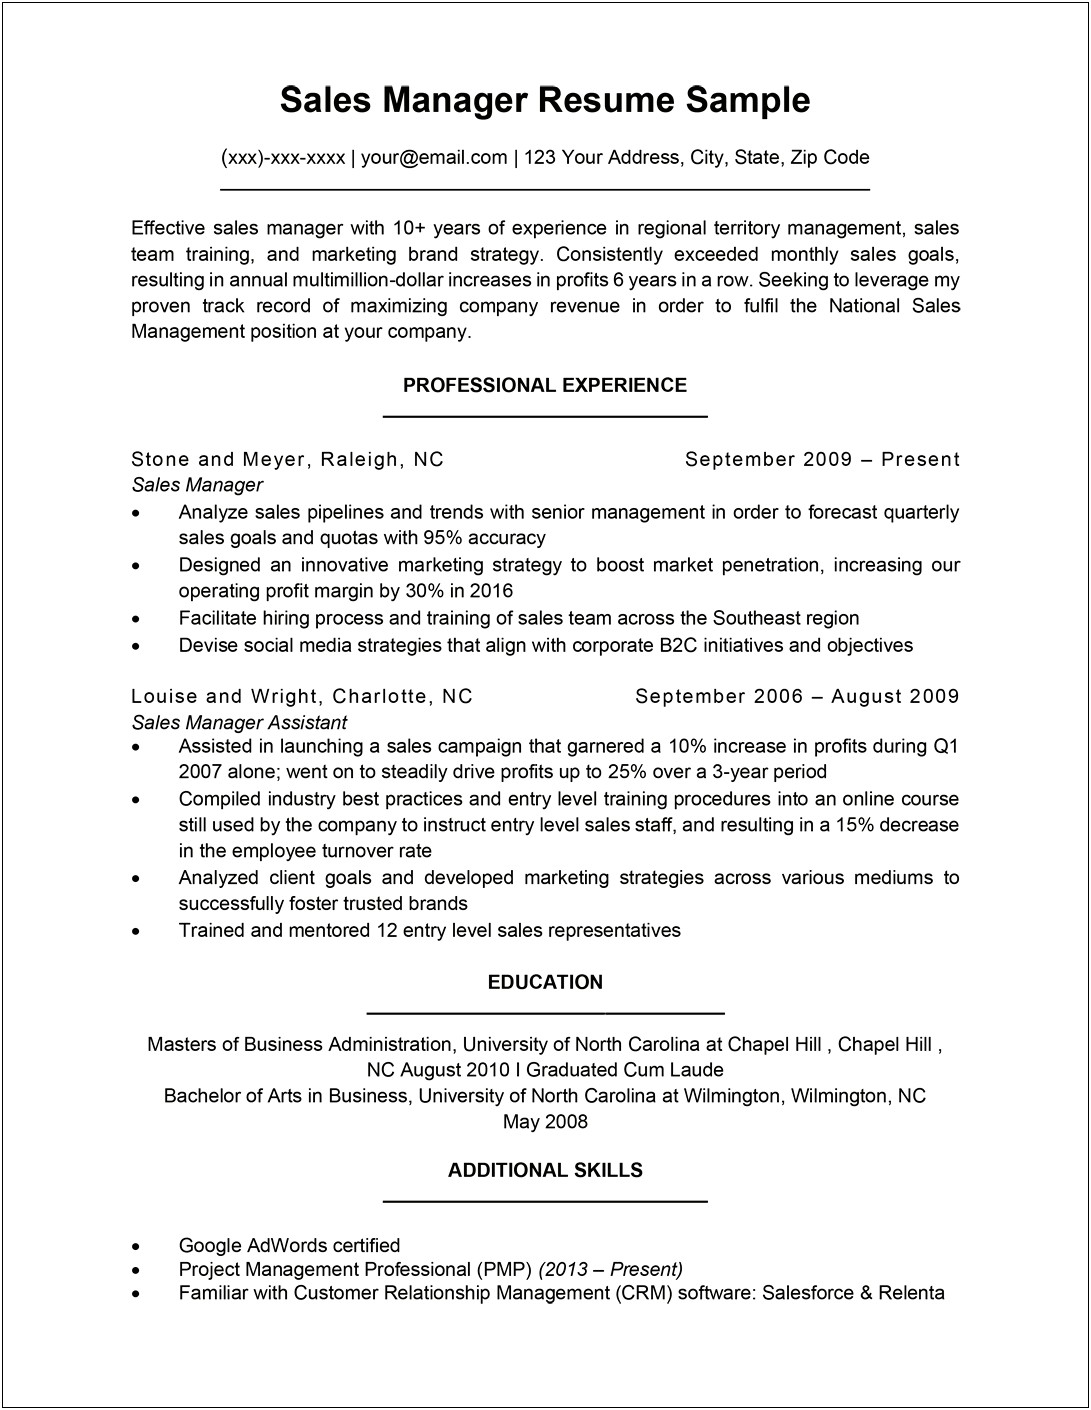 Resume Objective Statement Examples Entry Level Sales